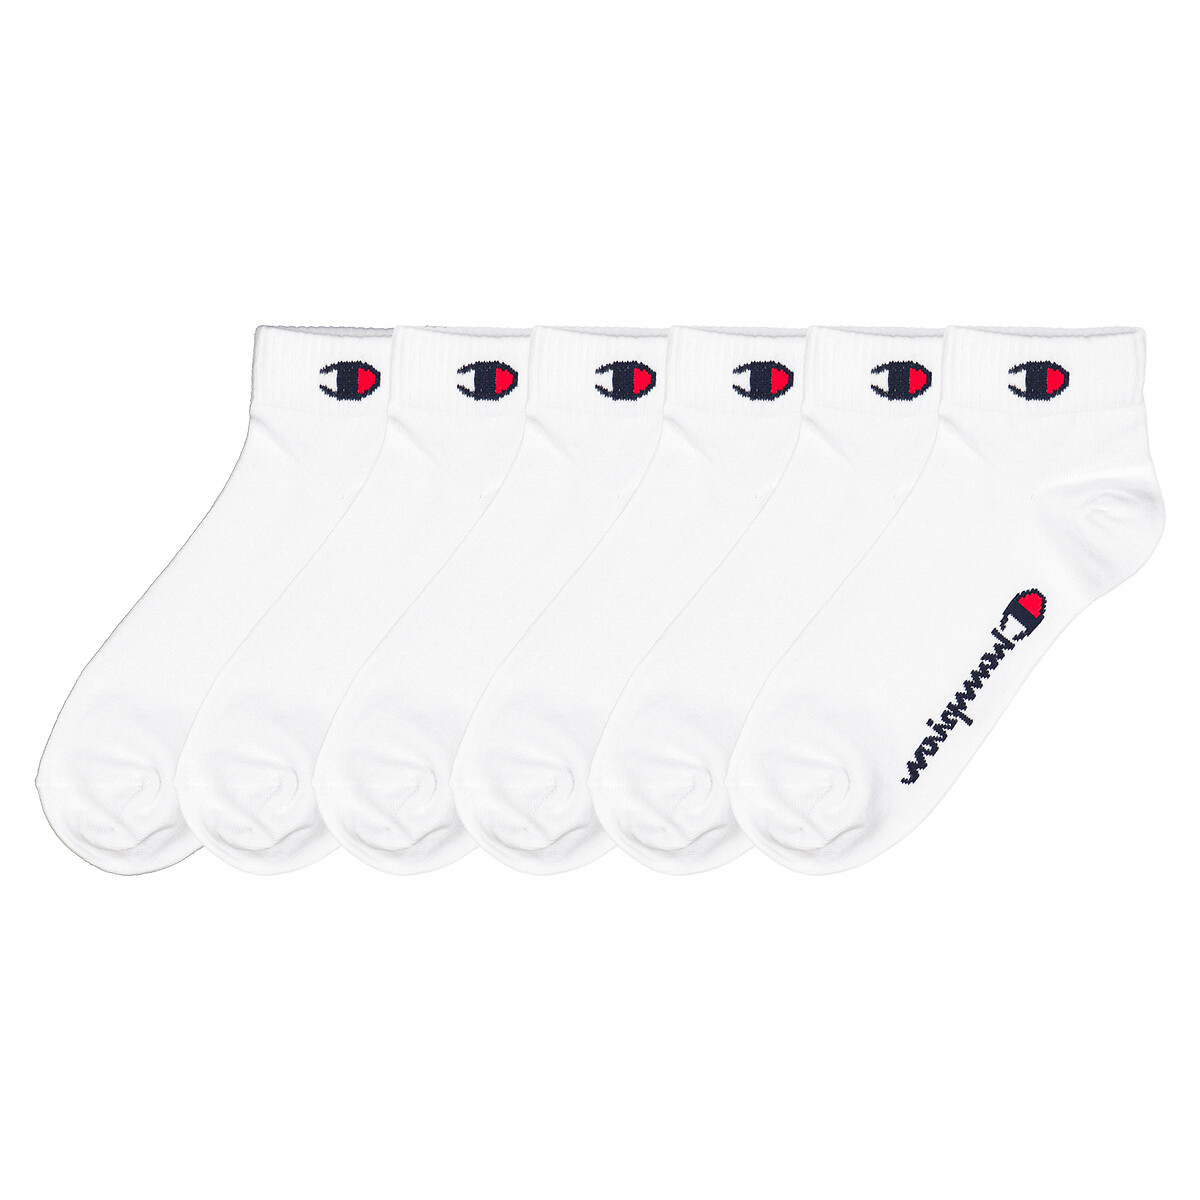 Image of Pack of 6 Pairs of Trainer Socks in Plain Cotton Mix